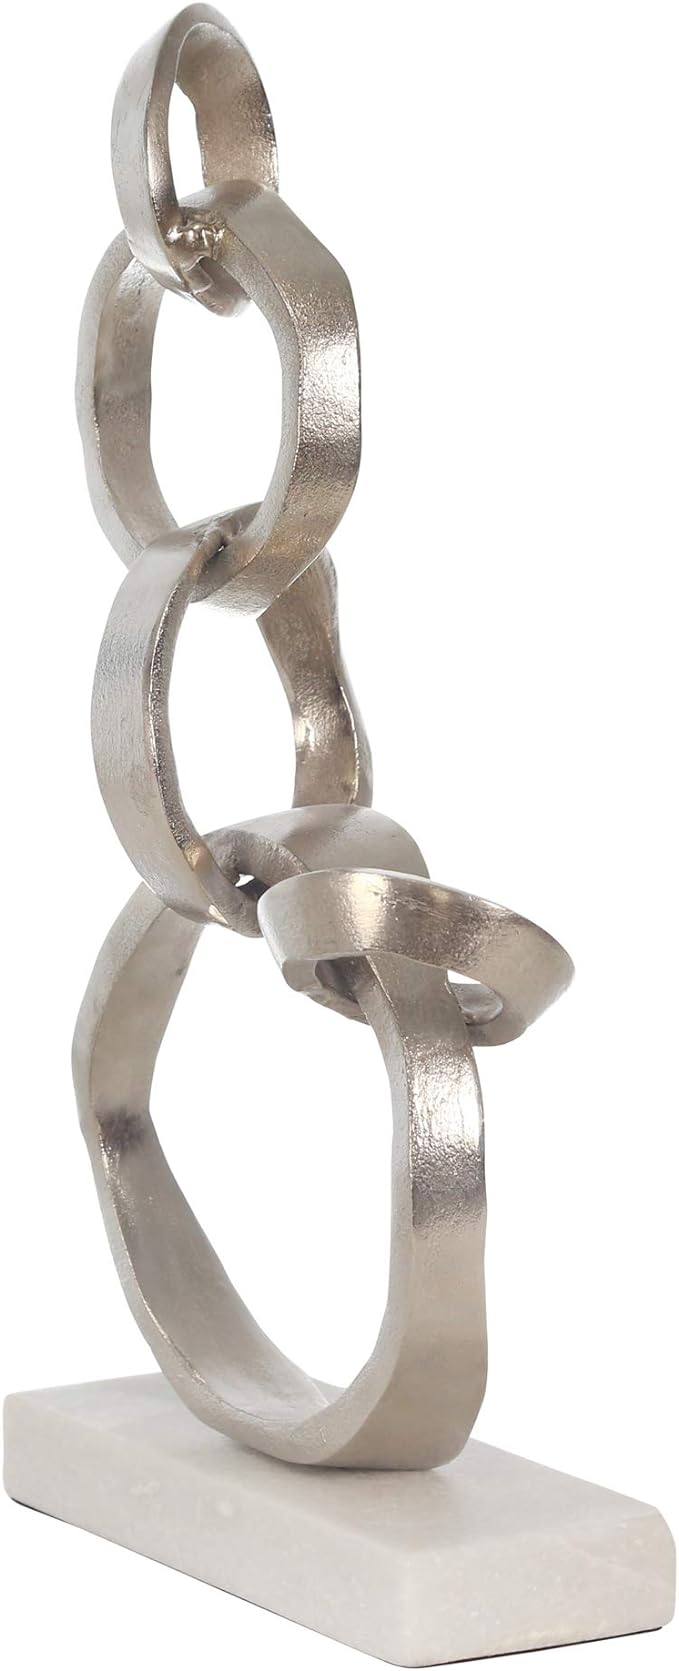 Linked Silver Rings On Marble Base